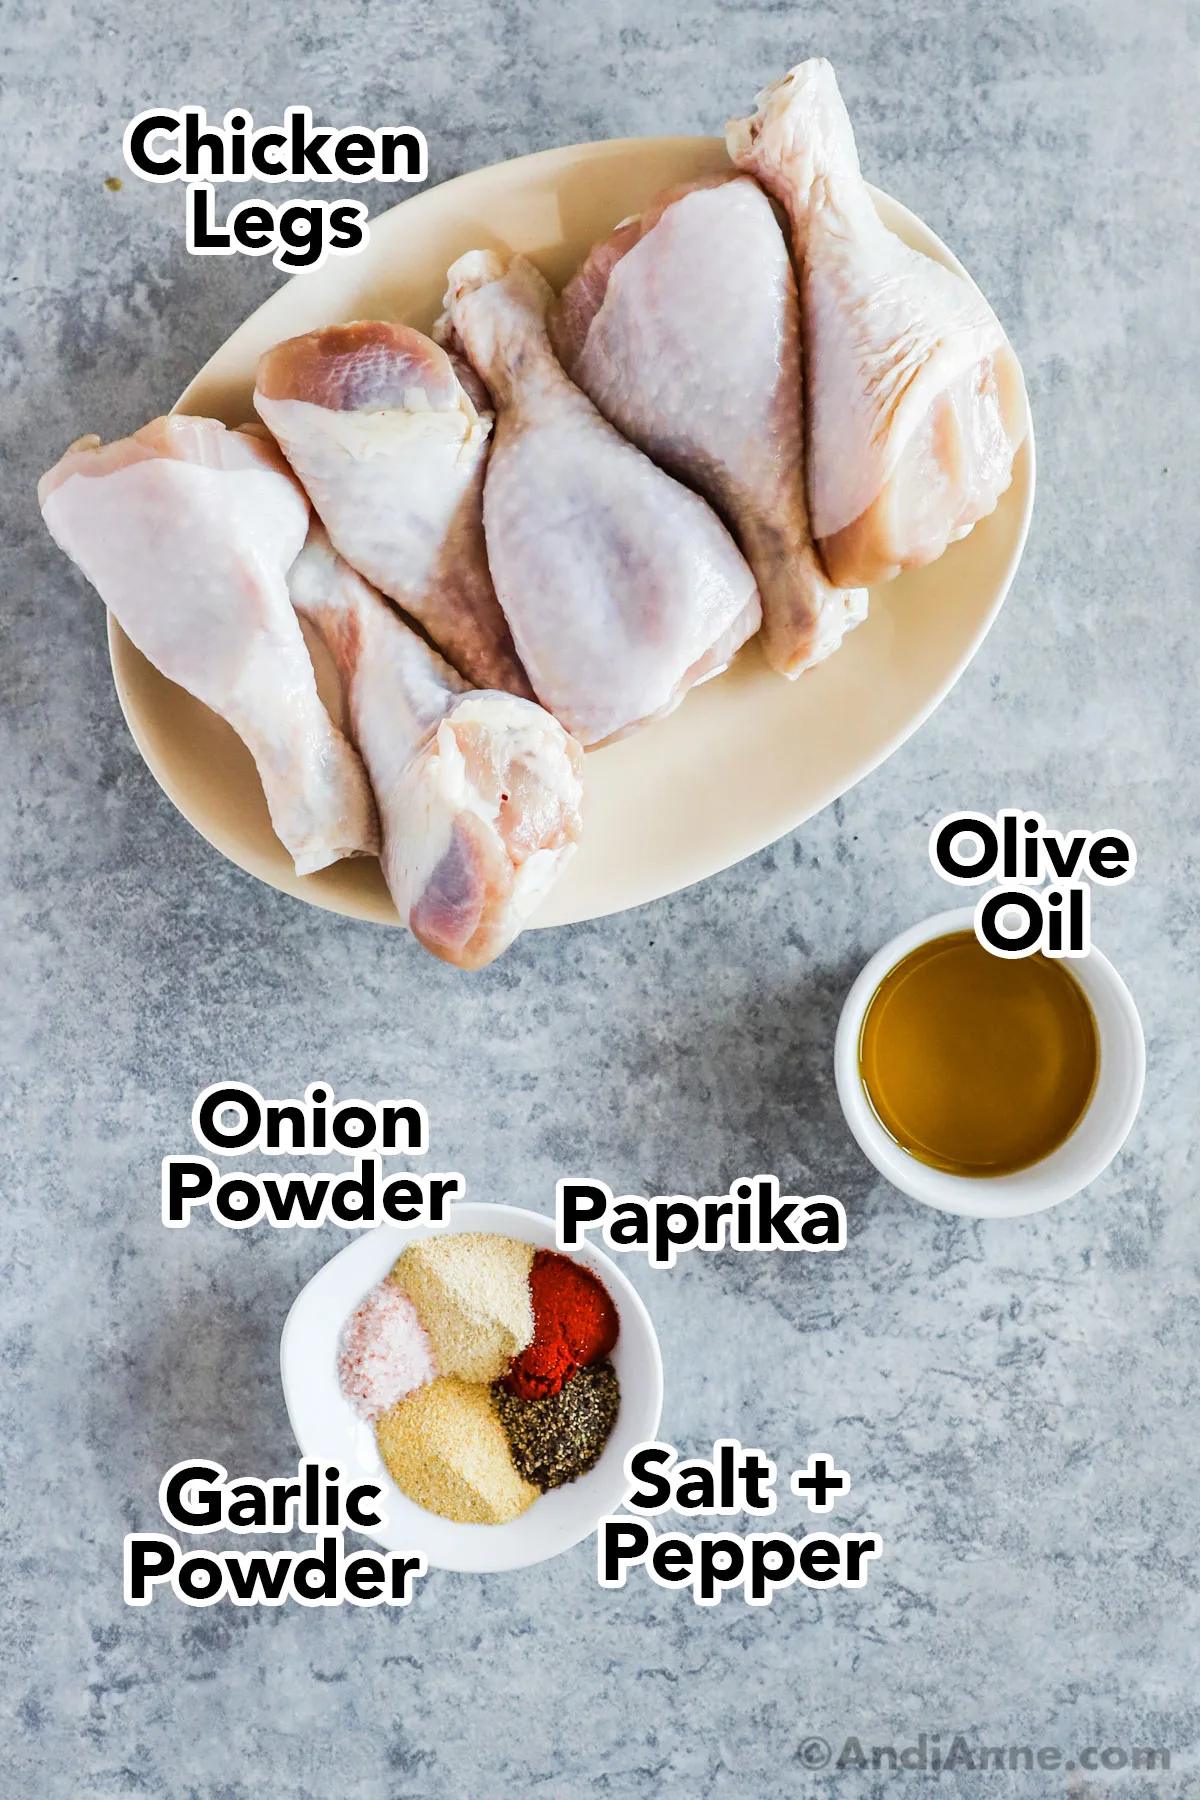 A plate of raw chicken drumsticks, bowl of olive oil, and small bowl with various spices.